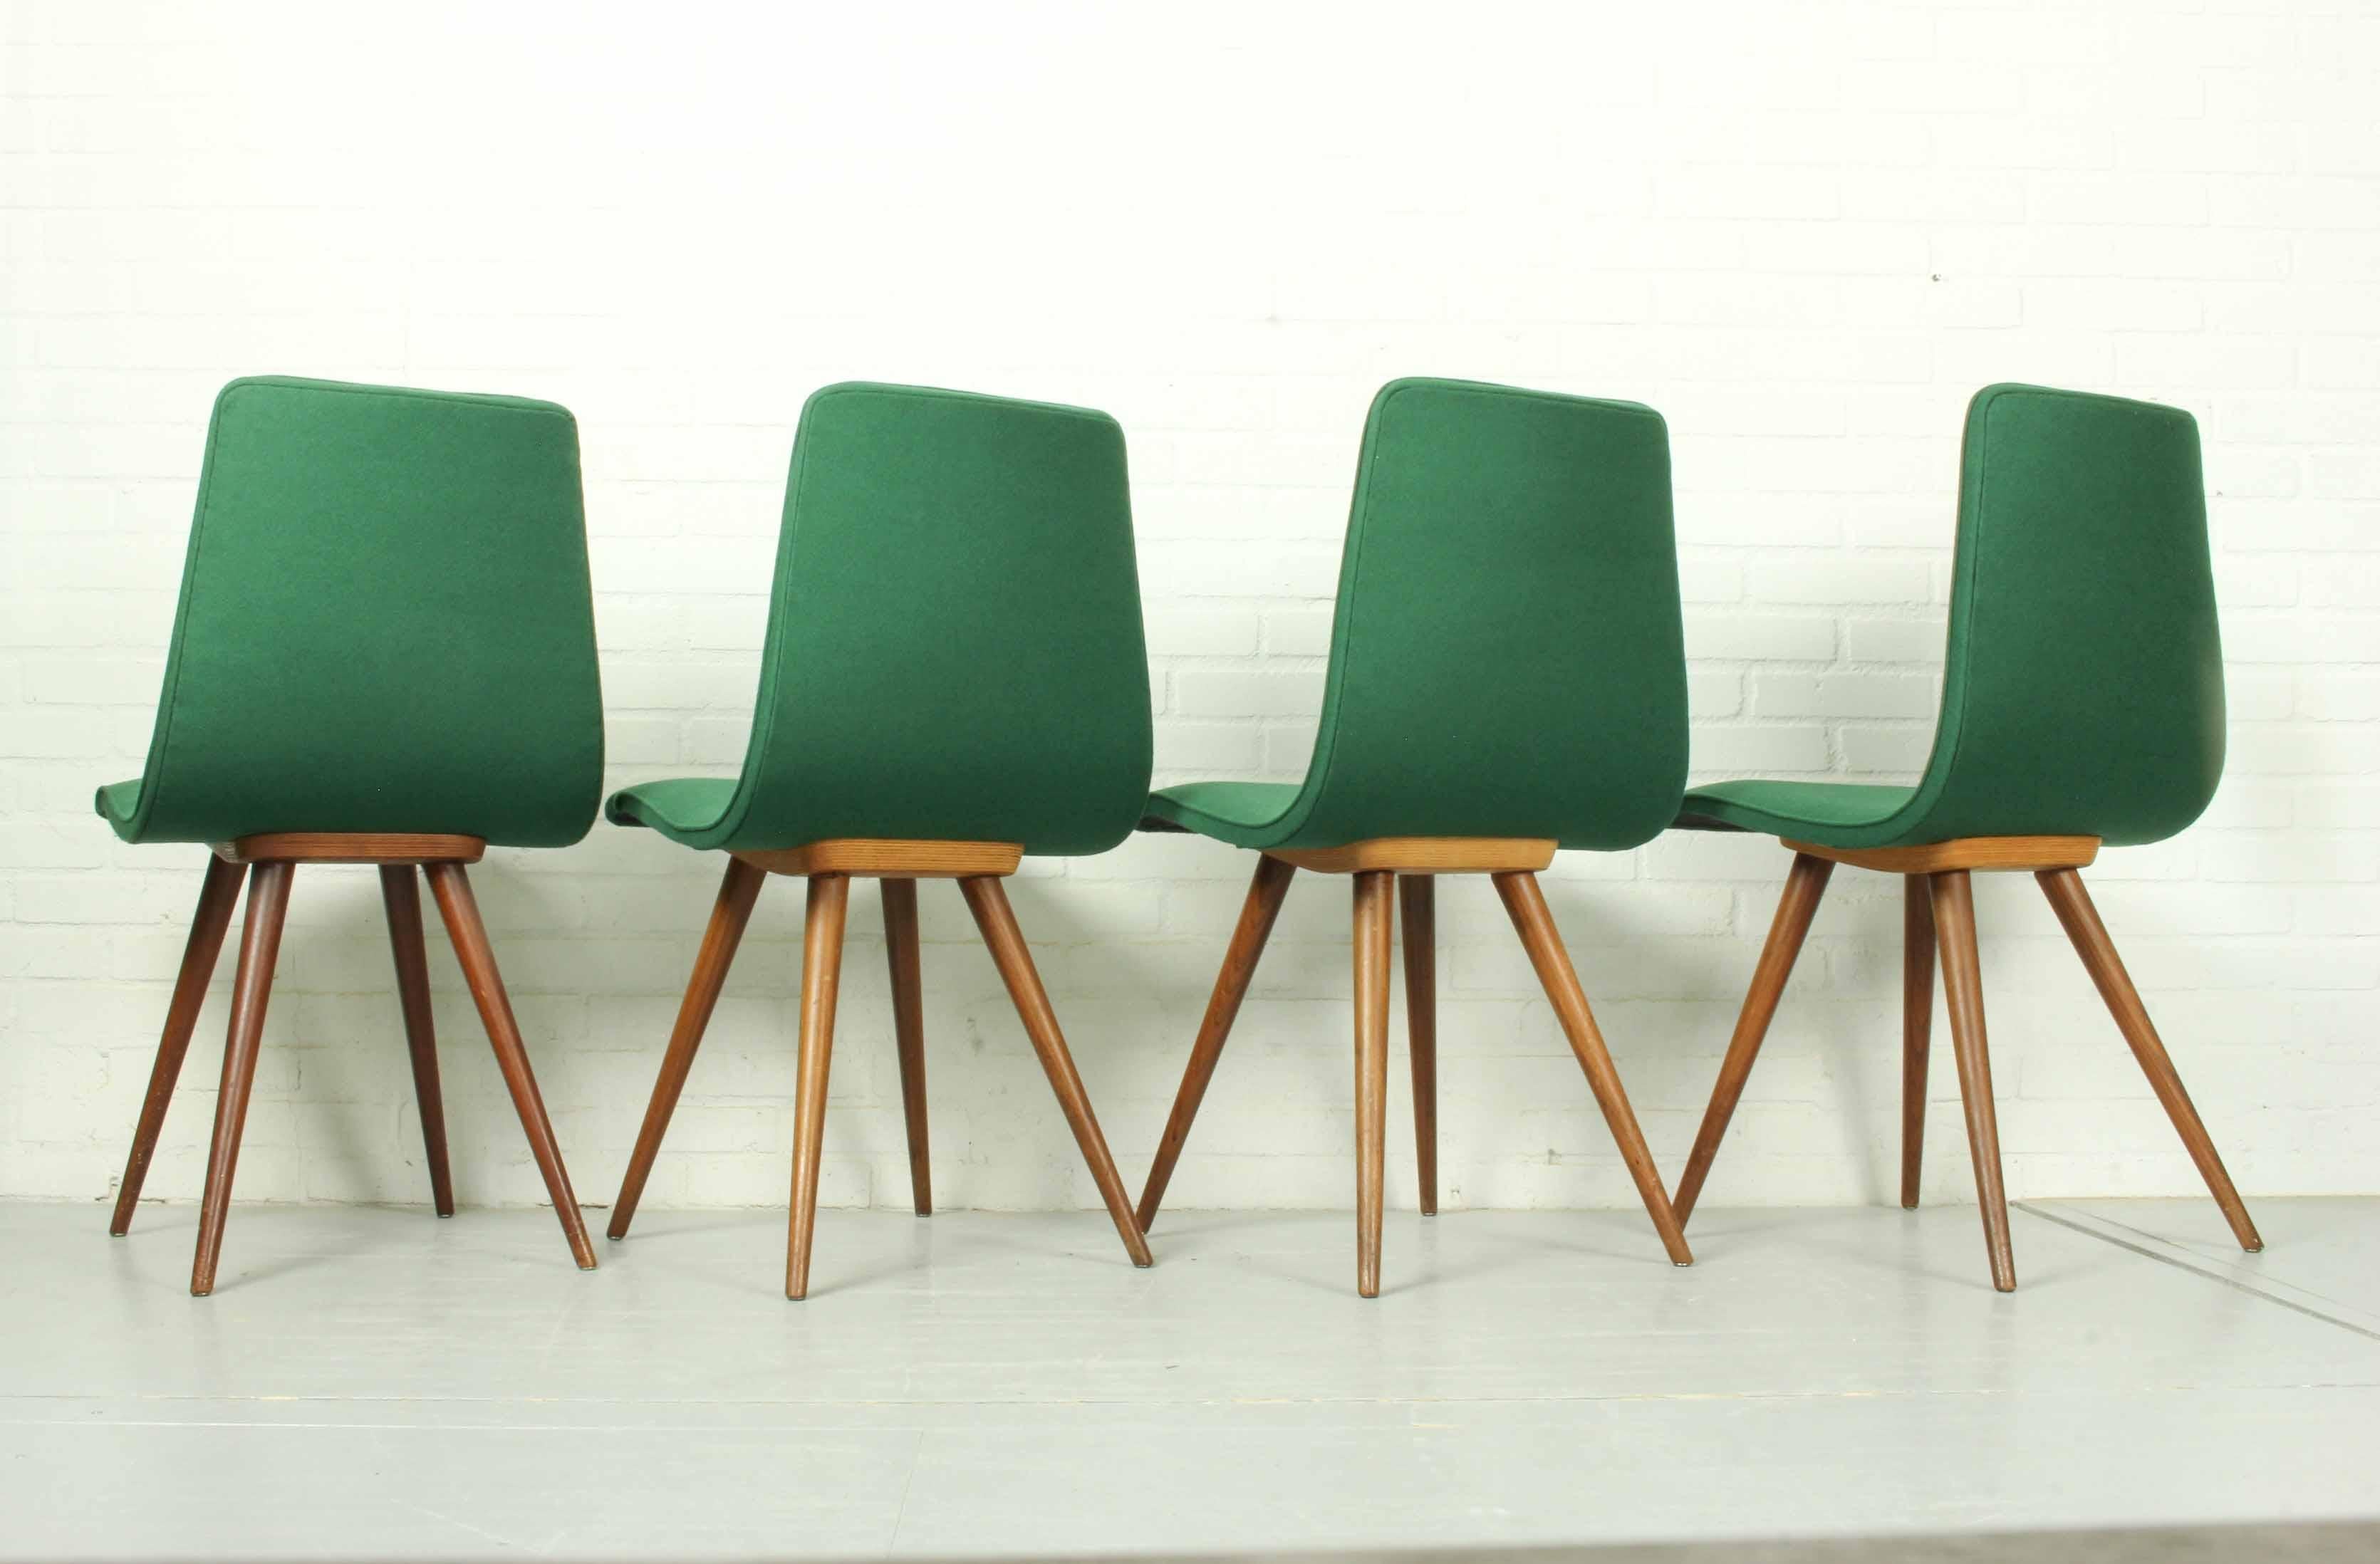 Set of 4 Teak Dining Chairs by Van Os, 1950s For Sale 2